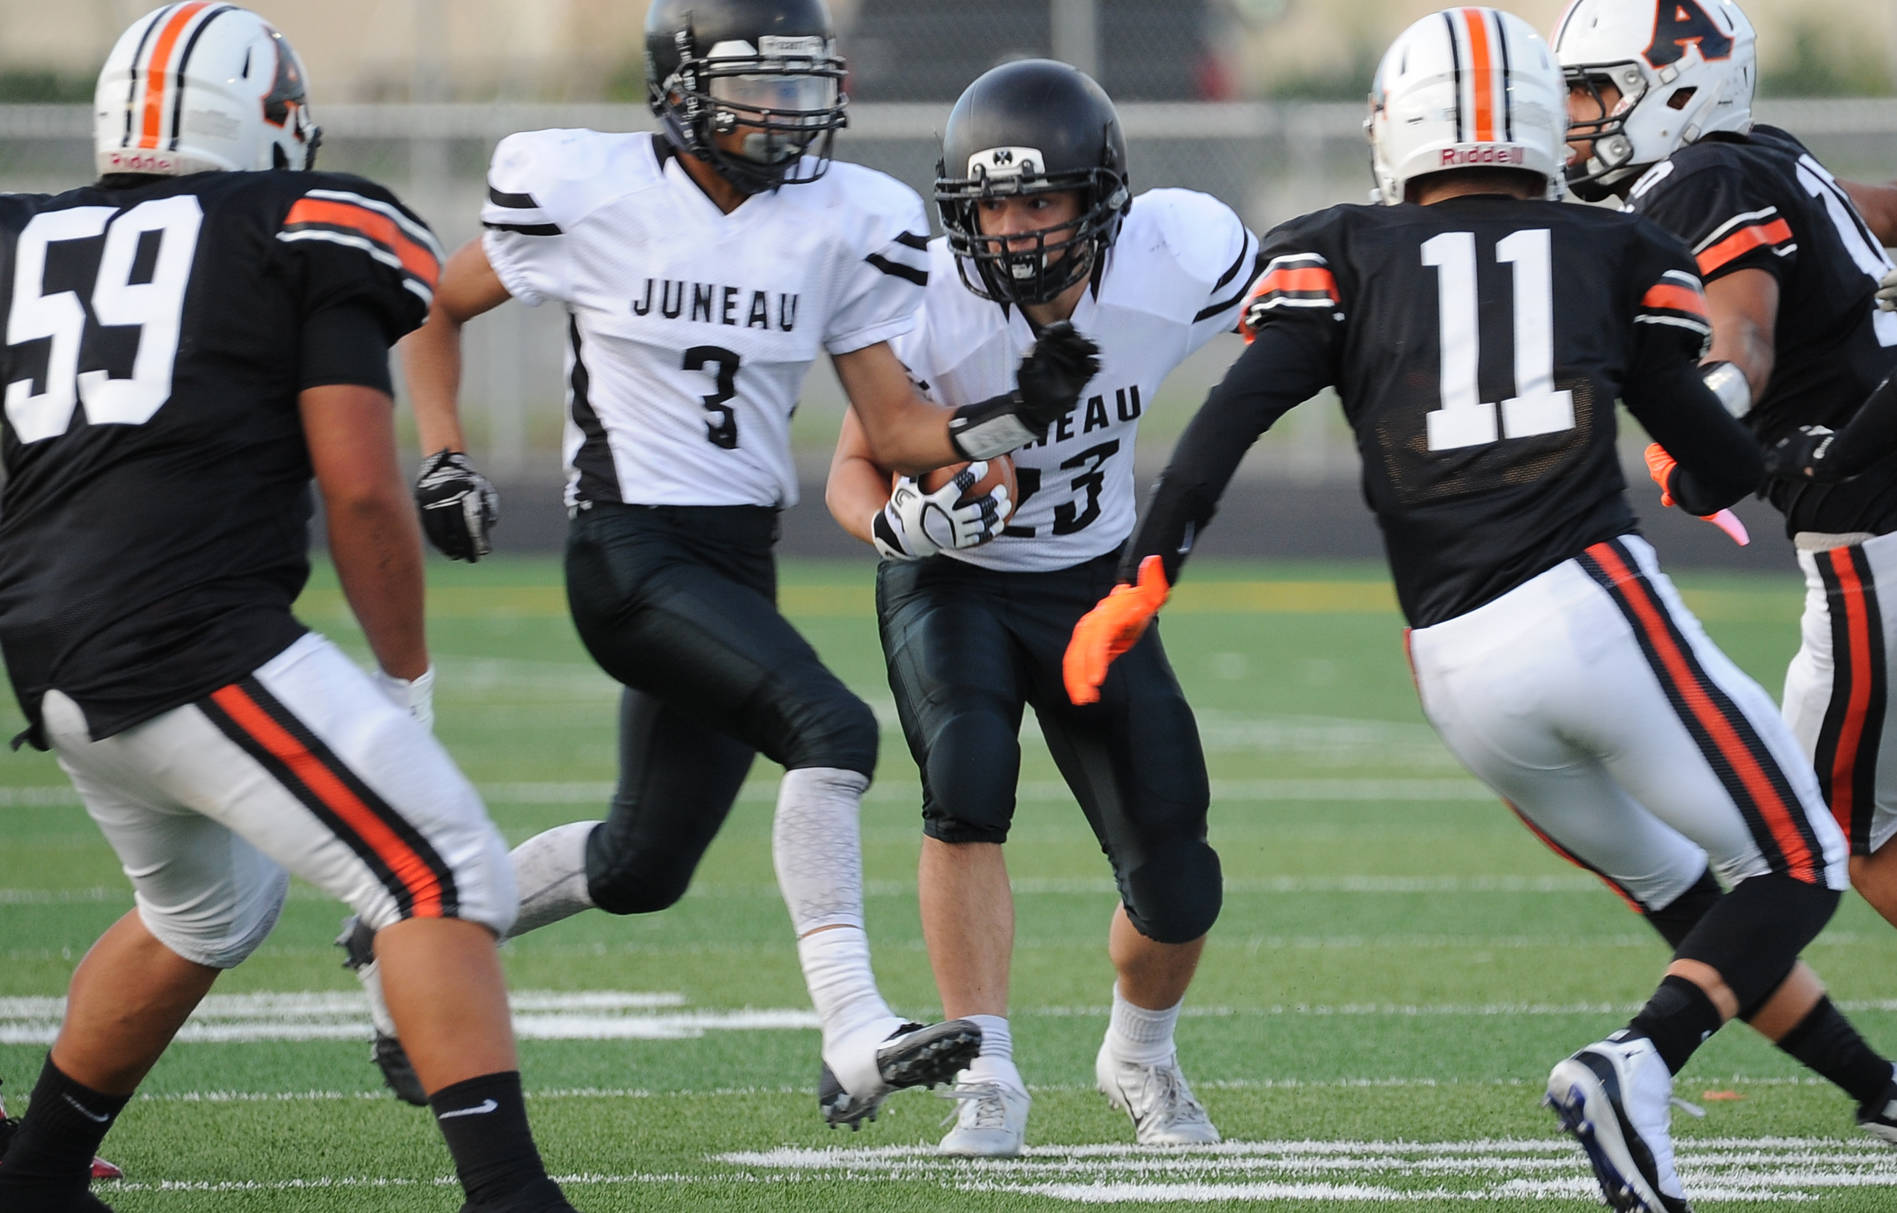 Juneau’s Cody Morehouse looks for room on a kickoff return. (Michael Dinneen | For the Juneau Empire)